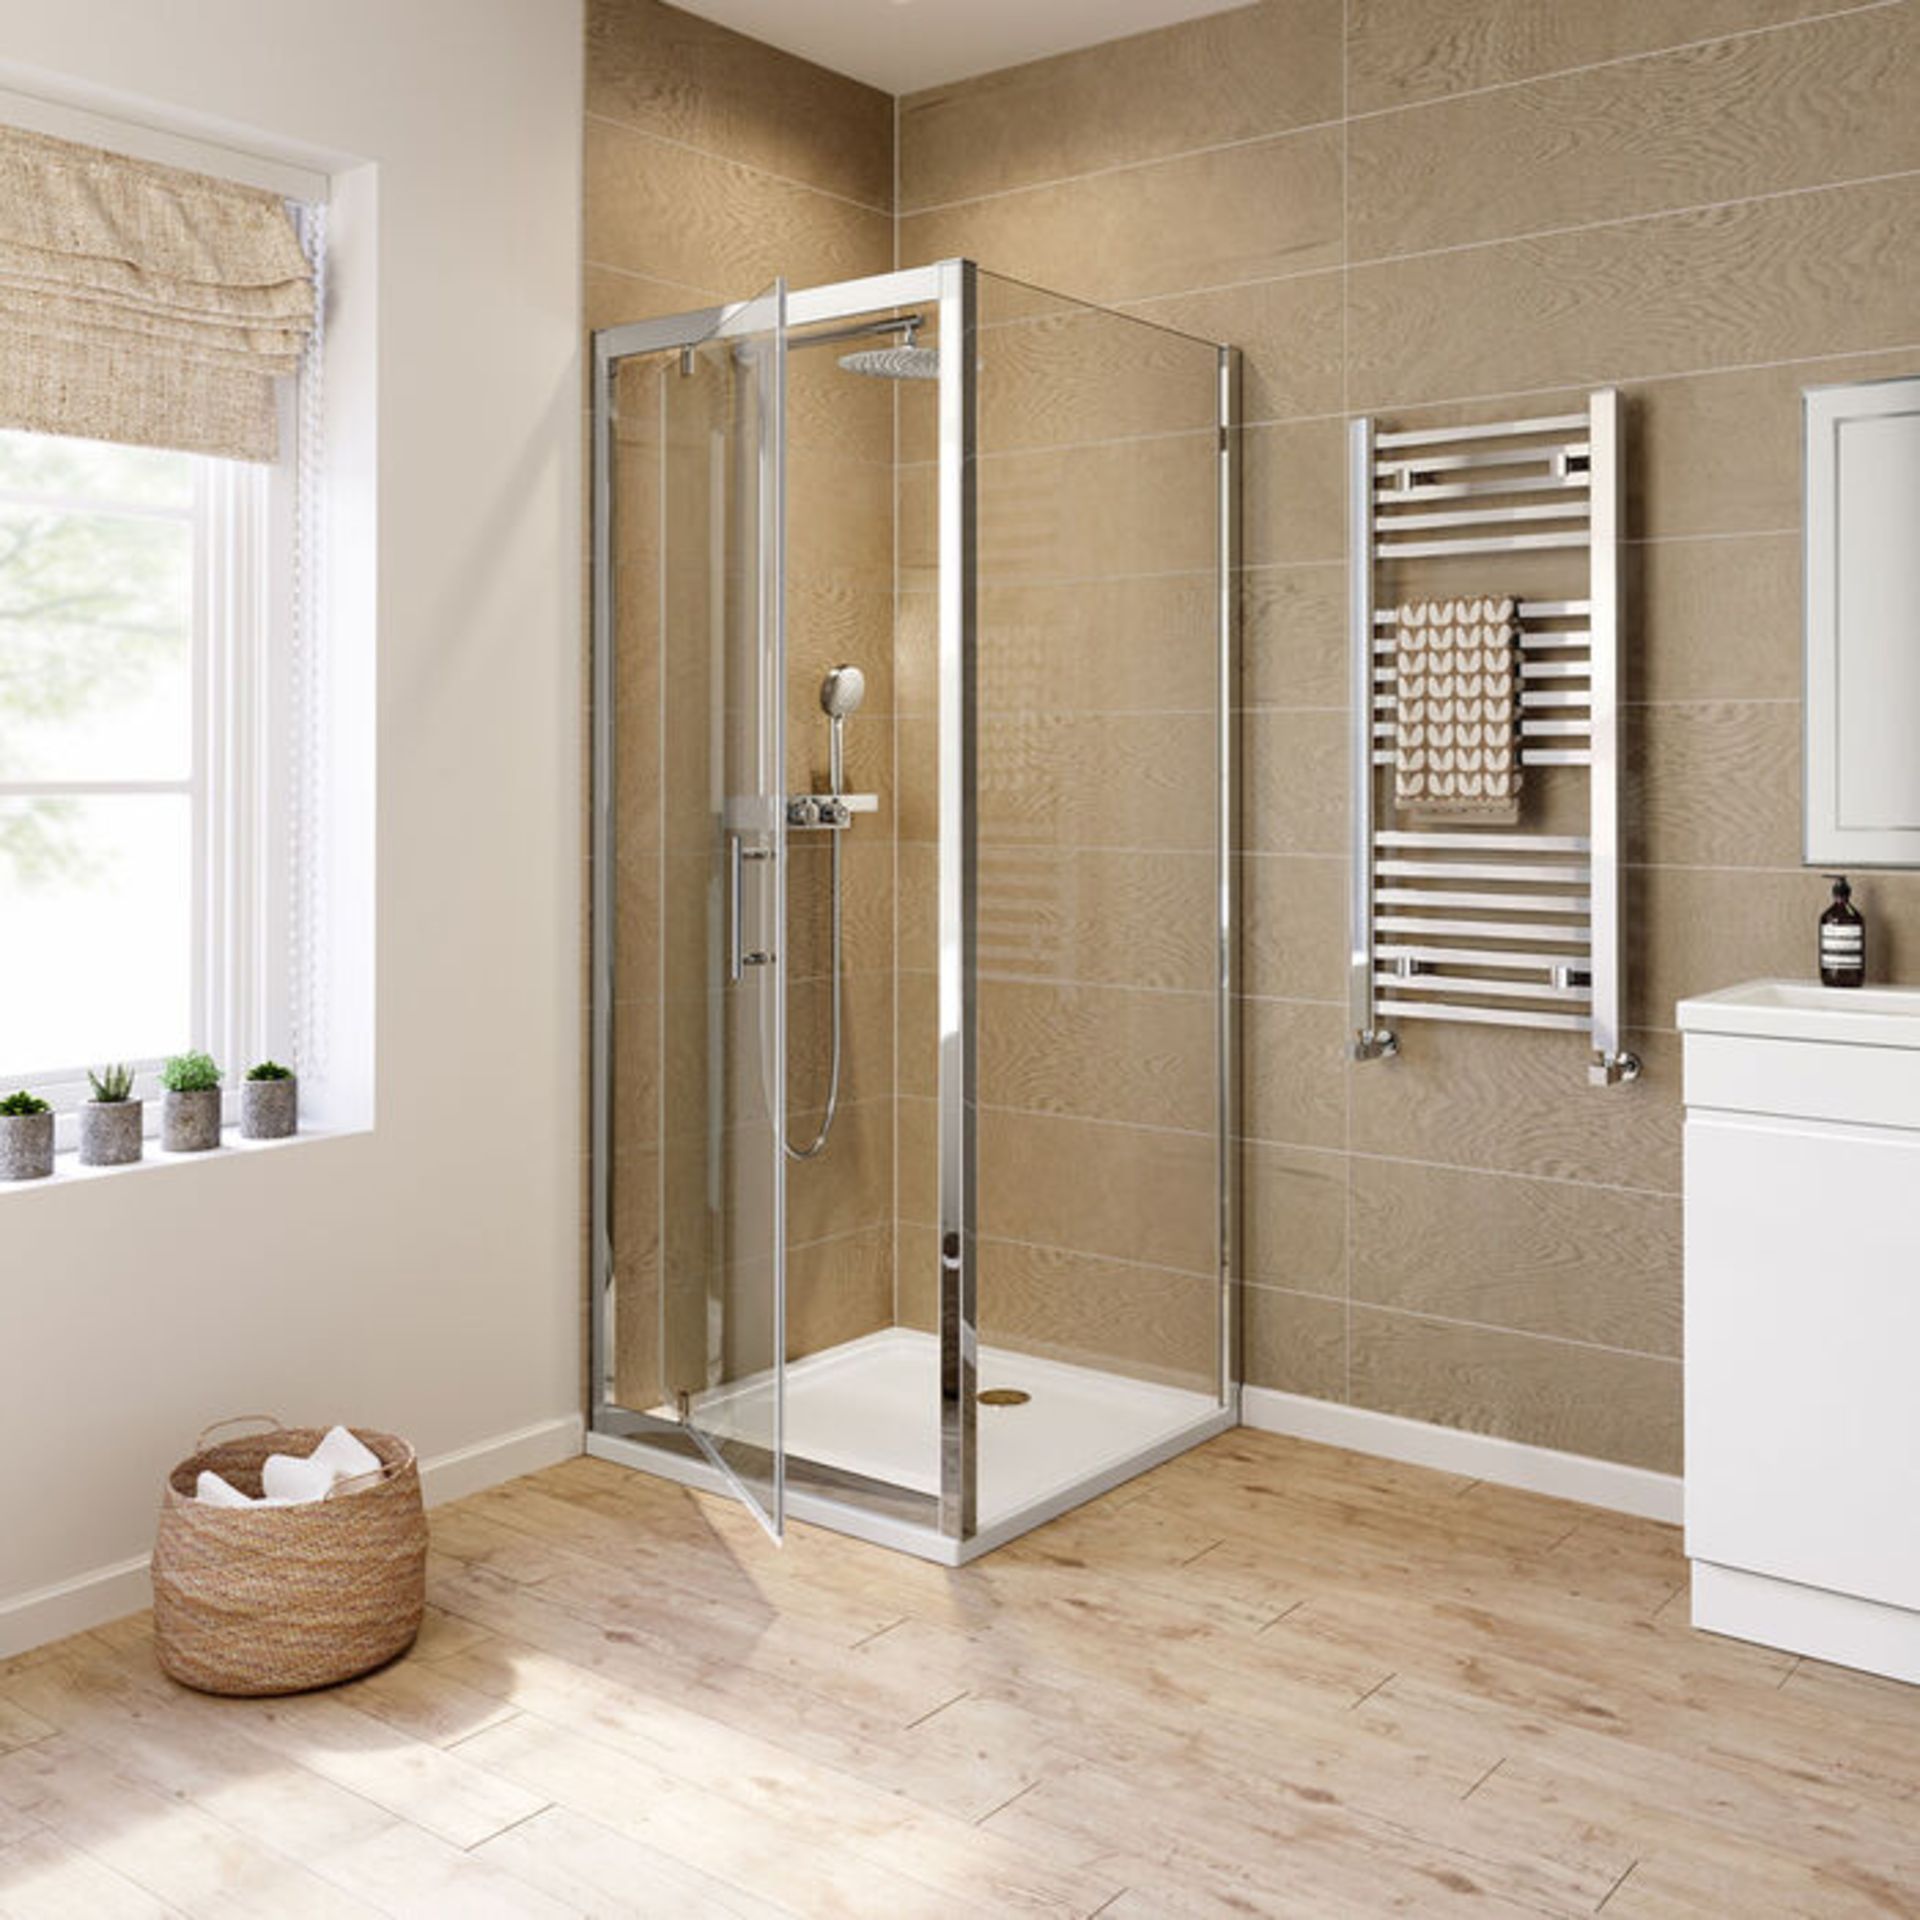 NEW 700x760mm - 6mm - Elements Pivot Door Shower Enclosure. RRP £330.99.6mm Safety Glass Full... - Image 3 of 3